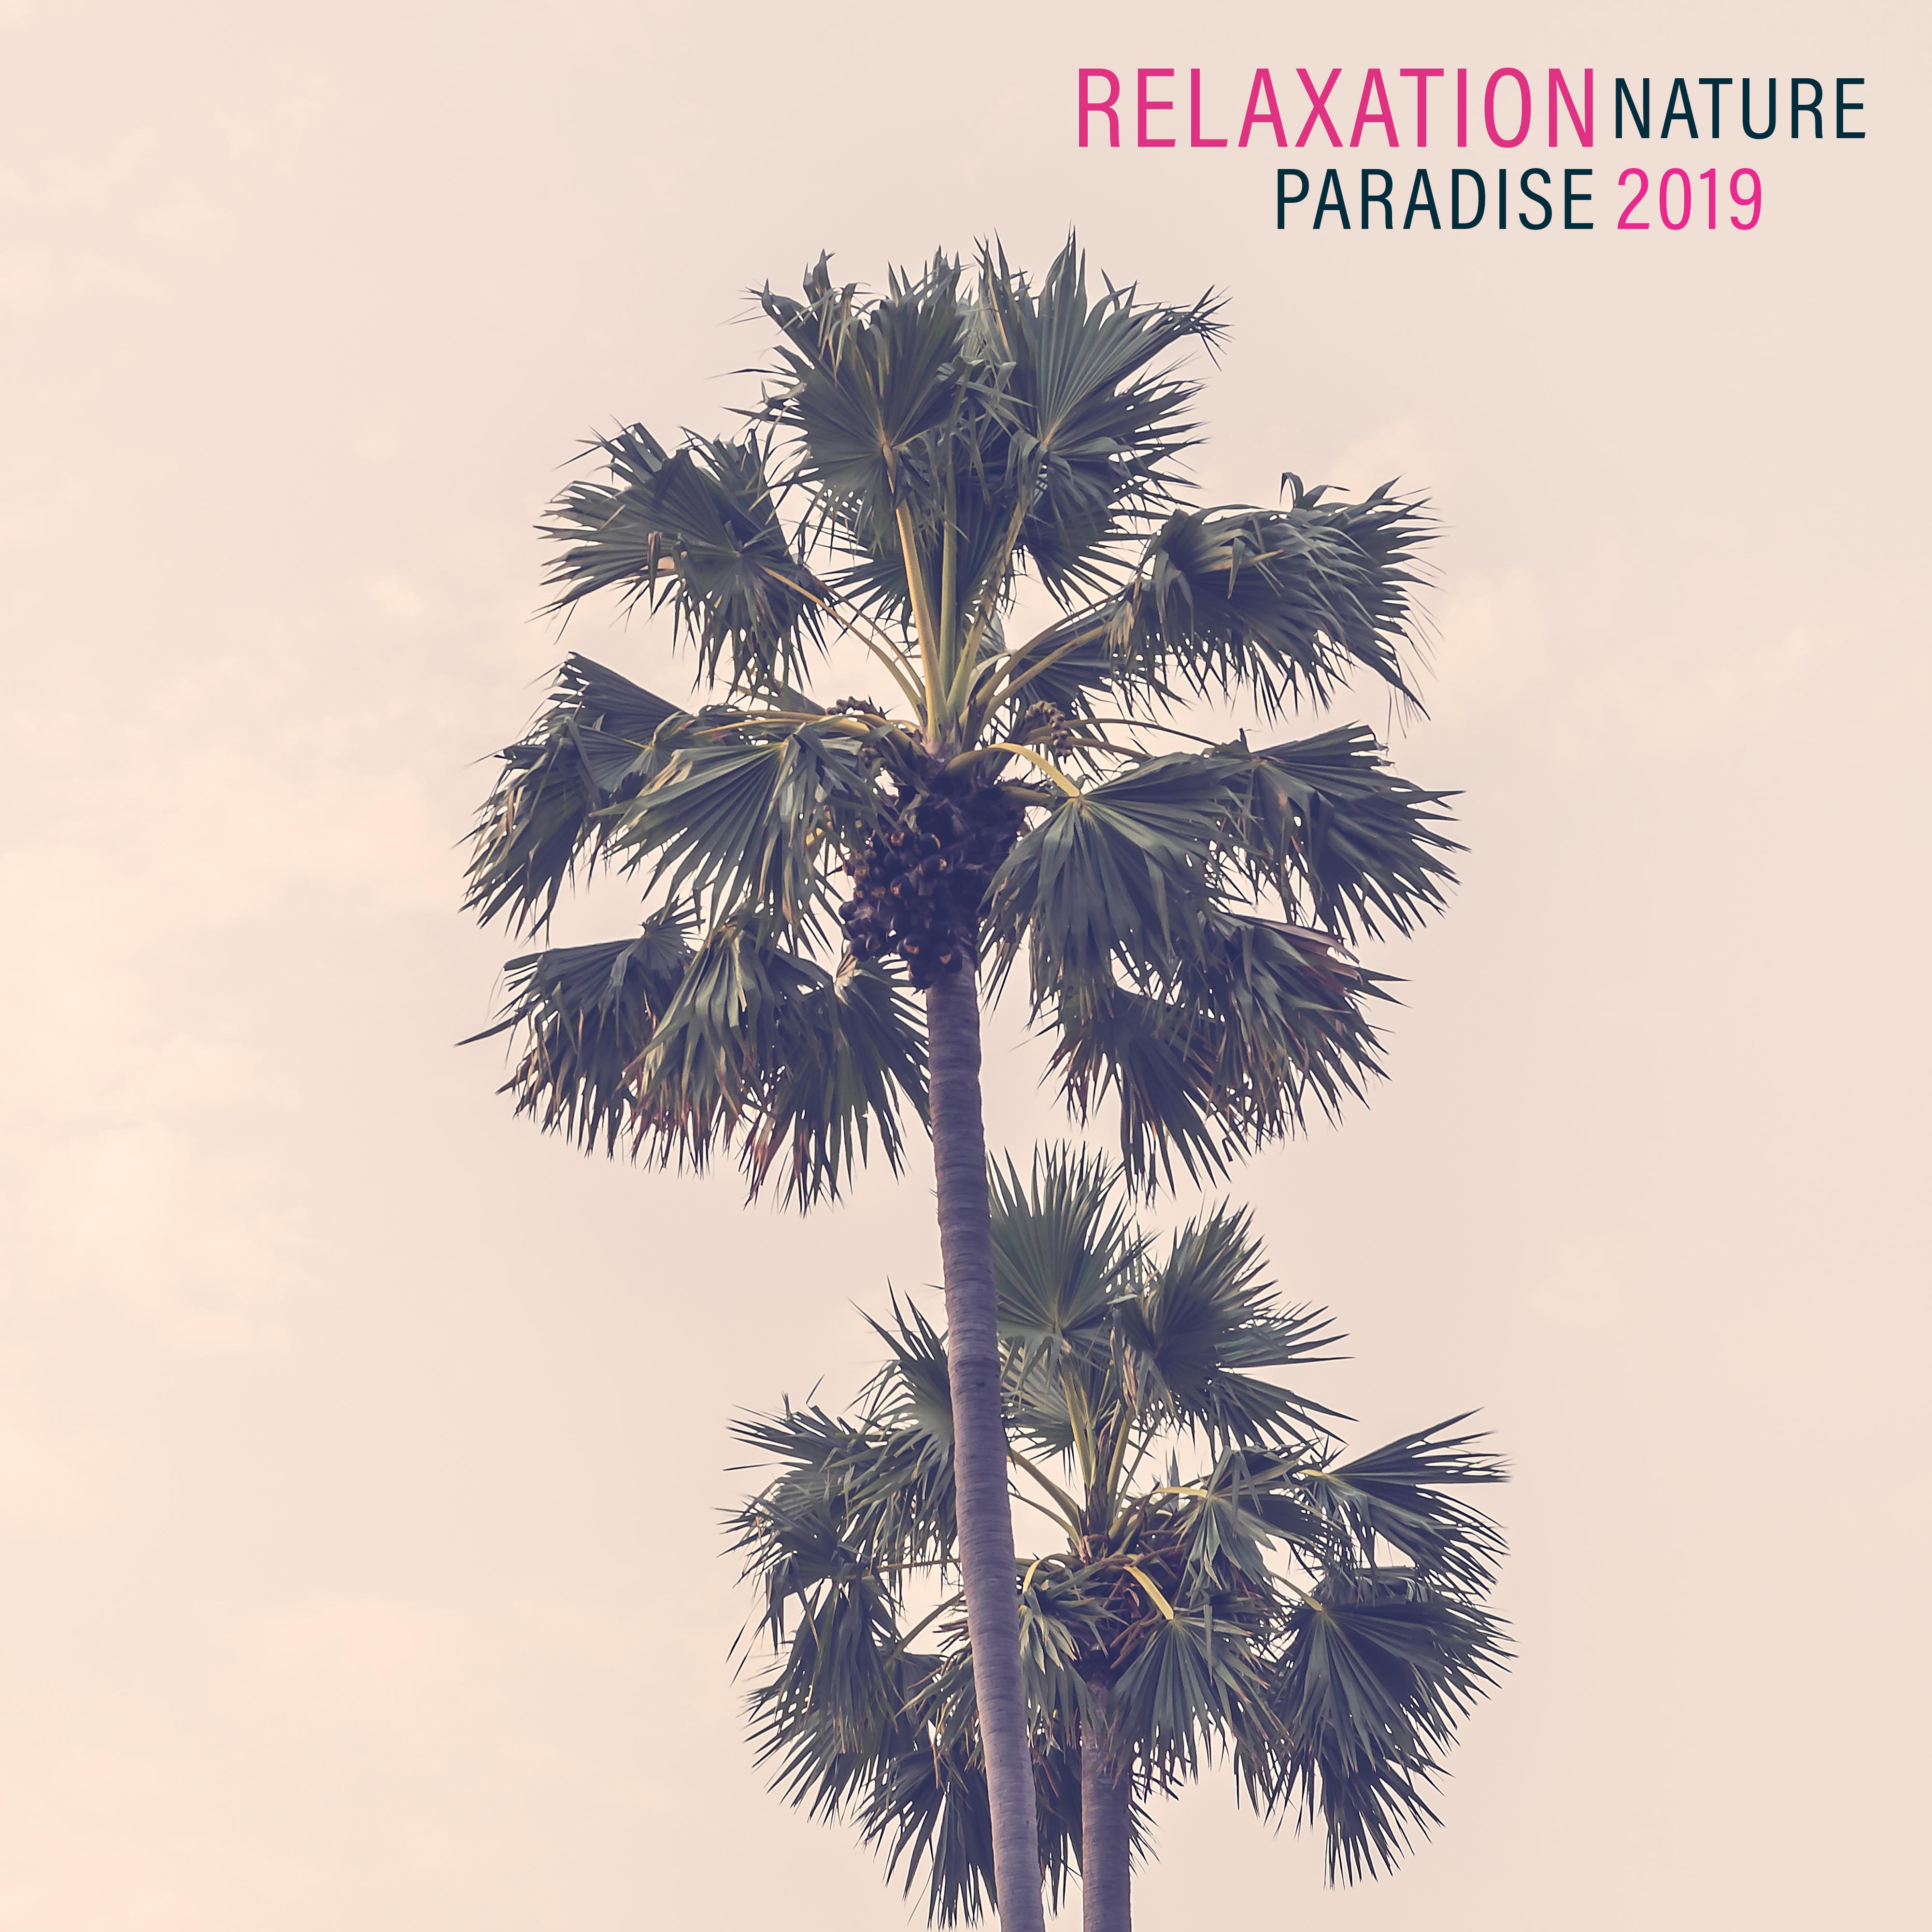 Relaxation Nature Paradise 2019: New Age Nature Fresh Music for Total Calming Down, De-Stress, Inner Healing & Peaceful Mind